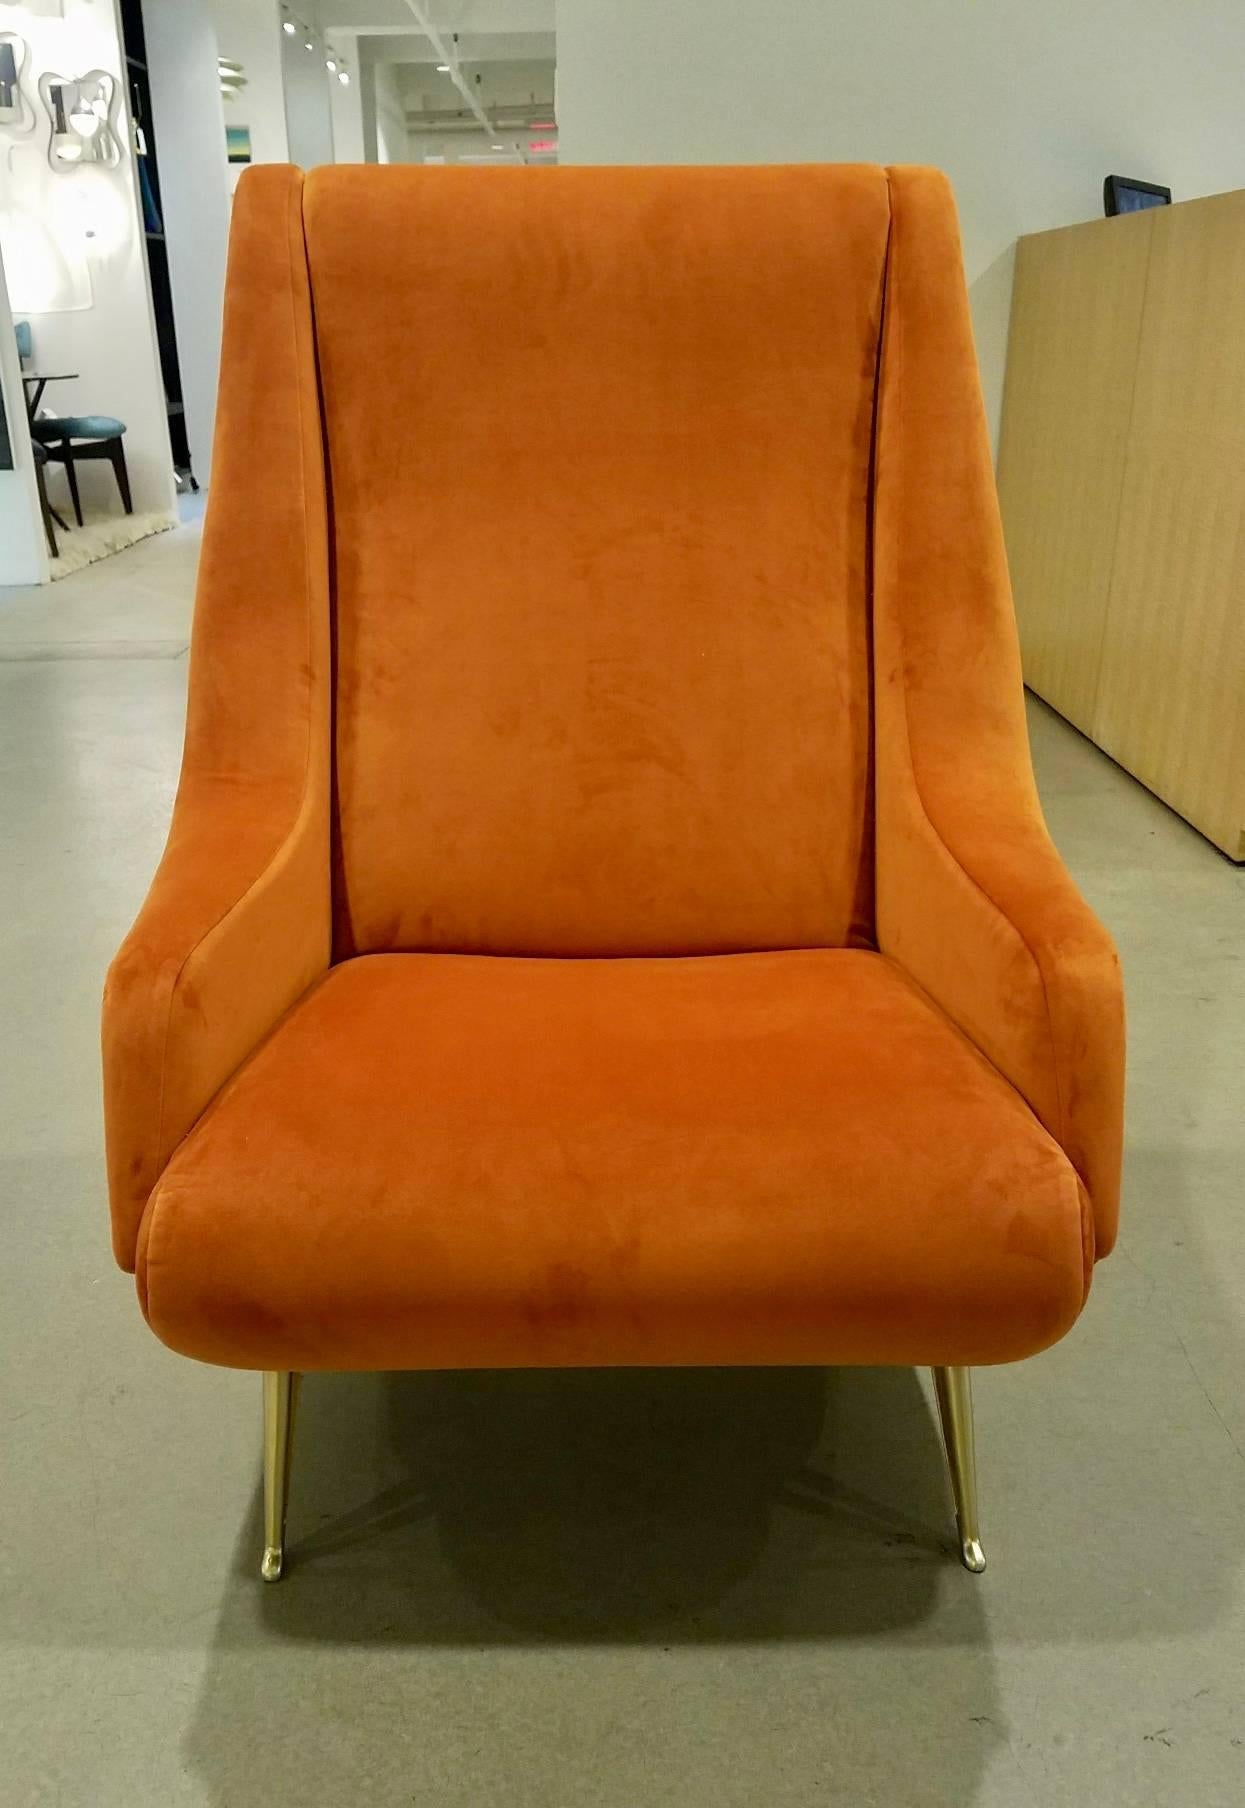 A pair of midcentury Italian newly upholstered burnt orange ultra suede armchairs attributed to ISA with generously proportioned, slanted high backs, and sinuous shaped arms around tightly upholstered seats, resting on gold-toned, splayed and